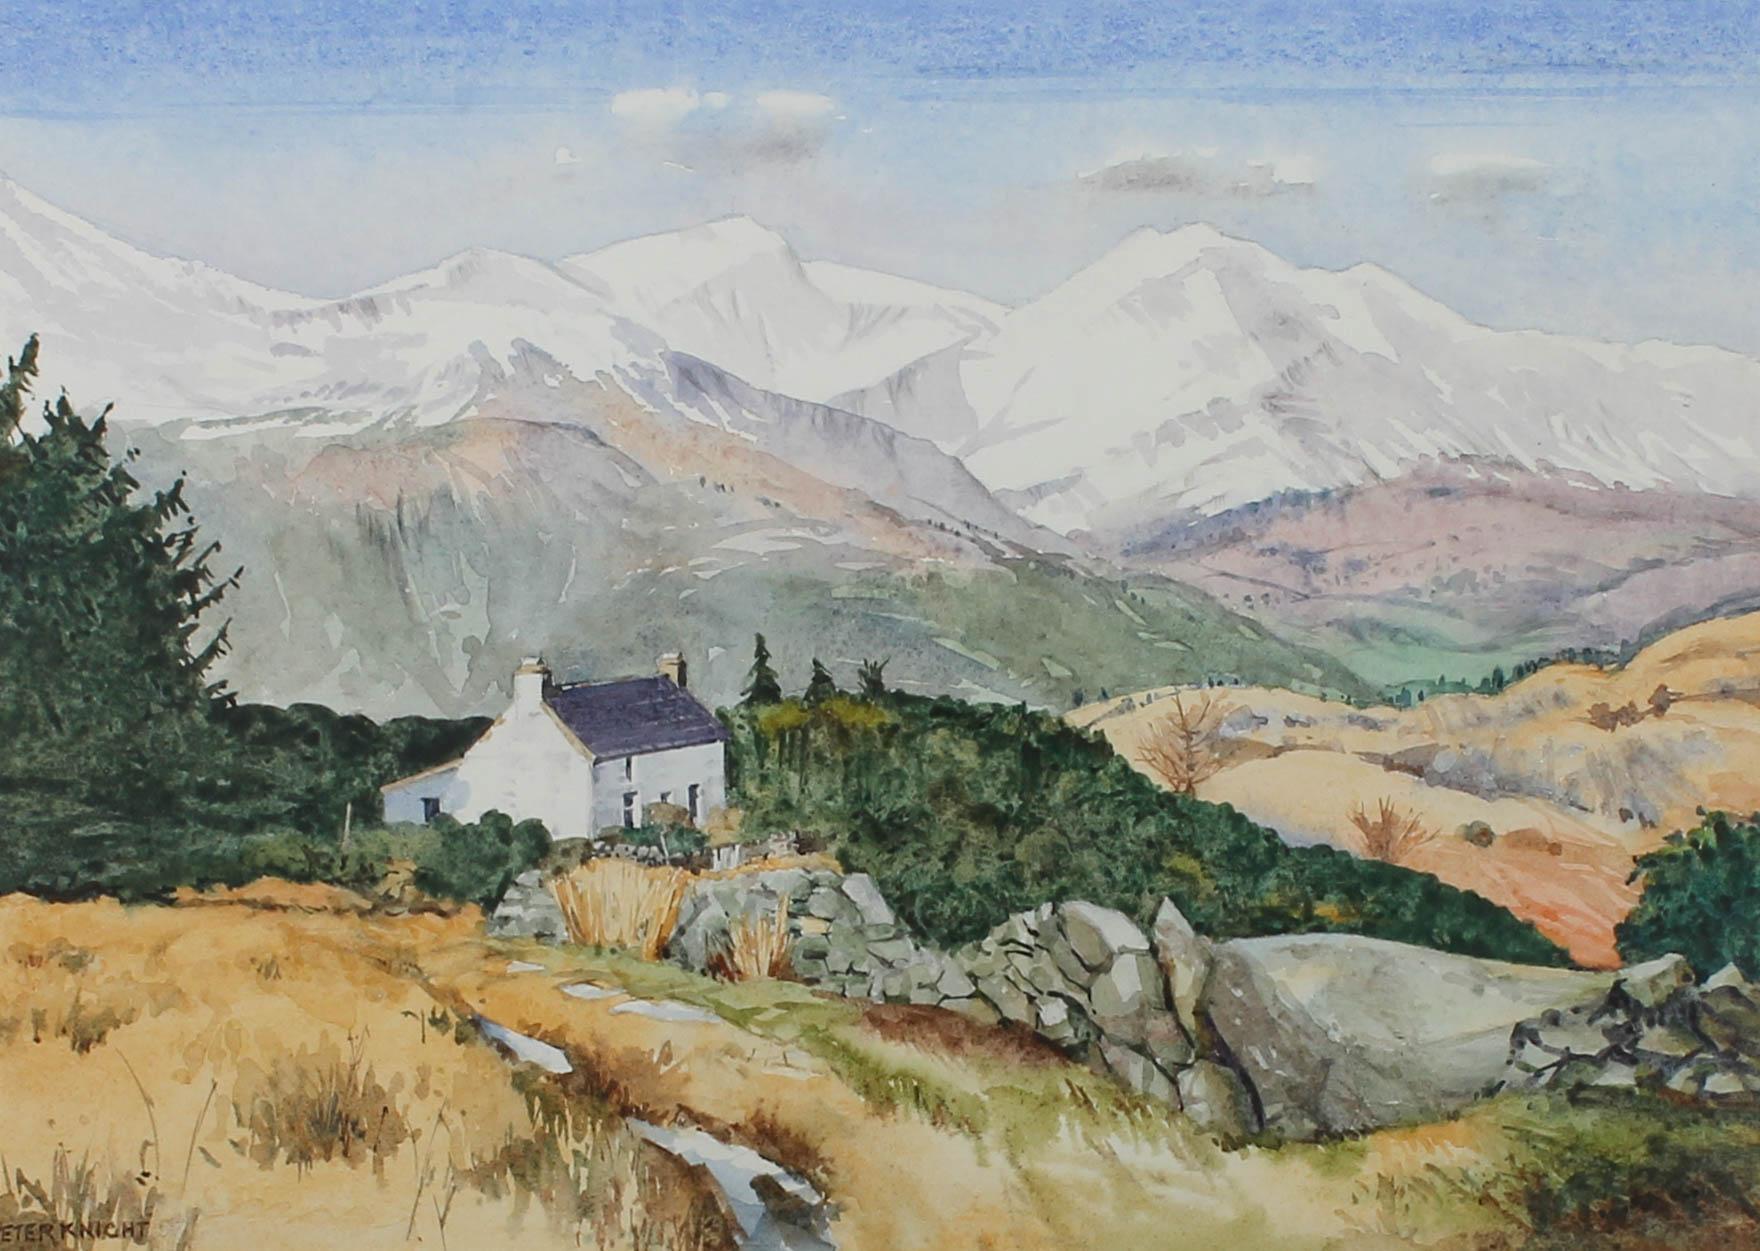 A captivating view of a remote rural landscape, with imposing white topped mountains and rolling hills. Nestled in the overgrown bracken and fir trees, is a quaint whitewashed cottage with slate roof. The painting is well presented in a contemporary